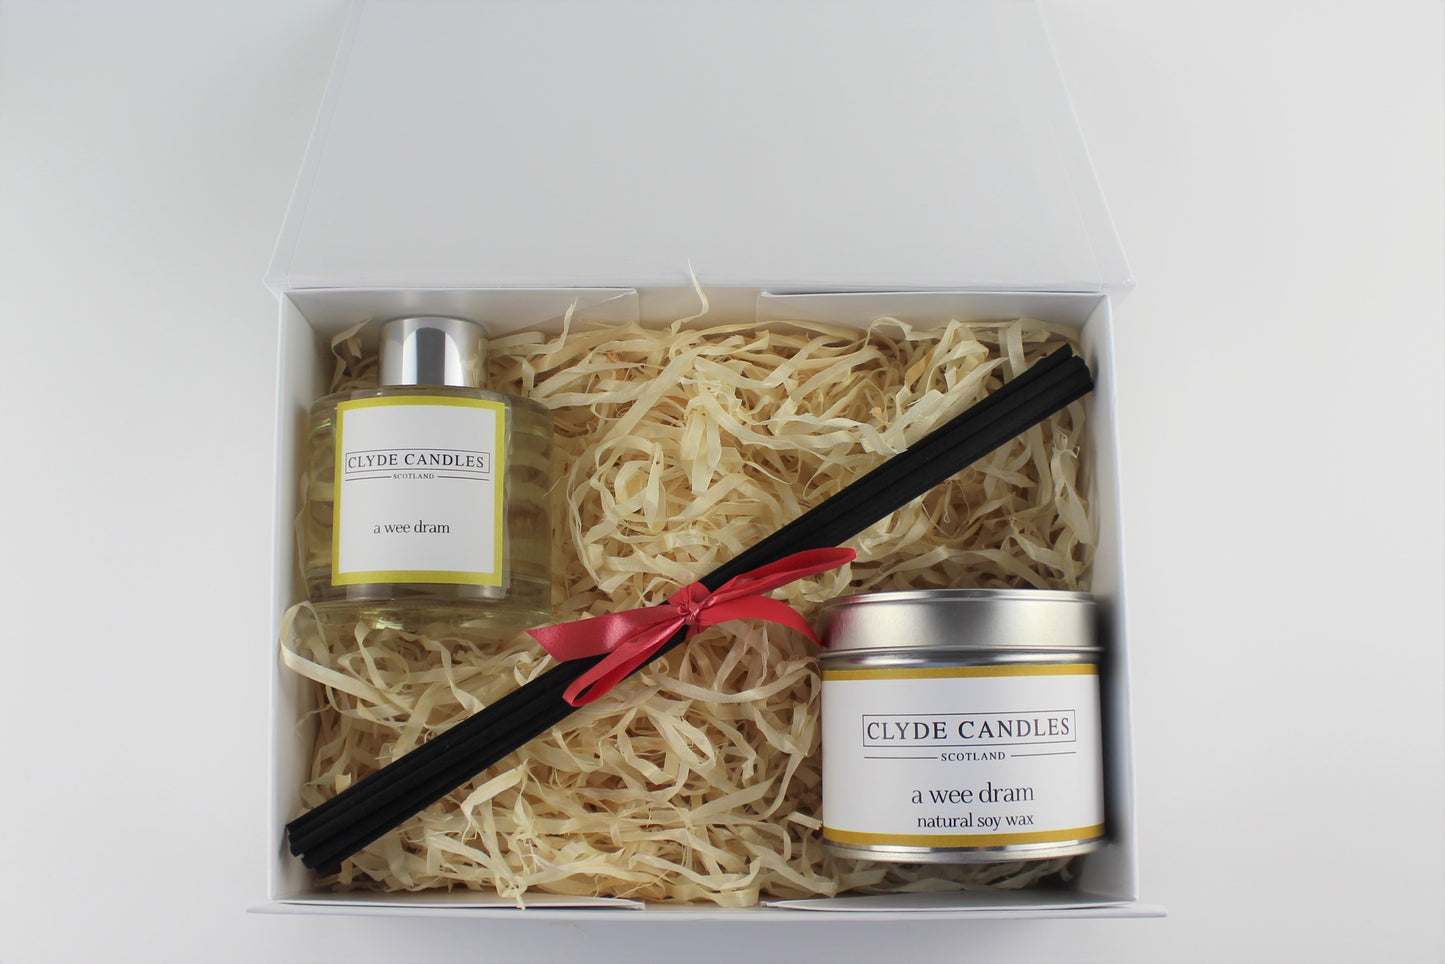 A Wee Dram Diffuser & Candle Gift Box Set - Scottish Natural Soy Candle